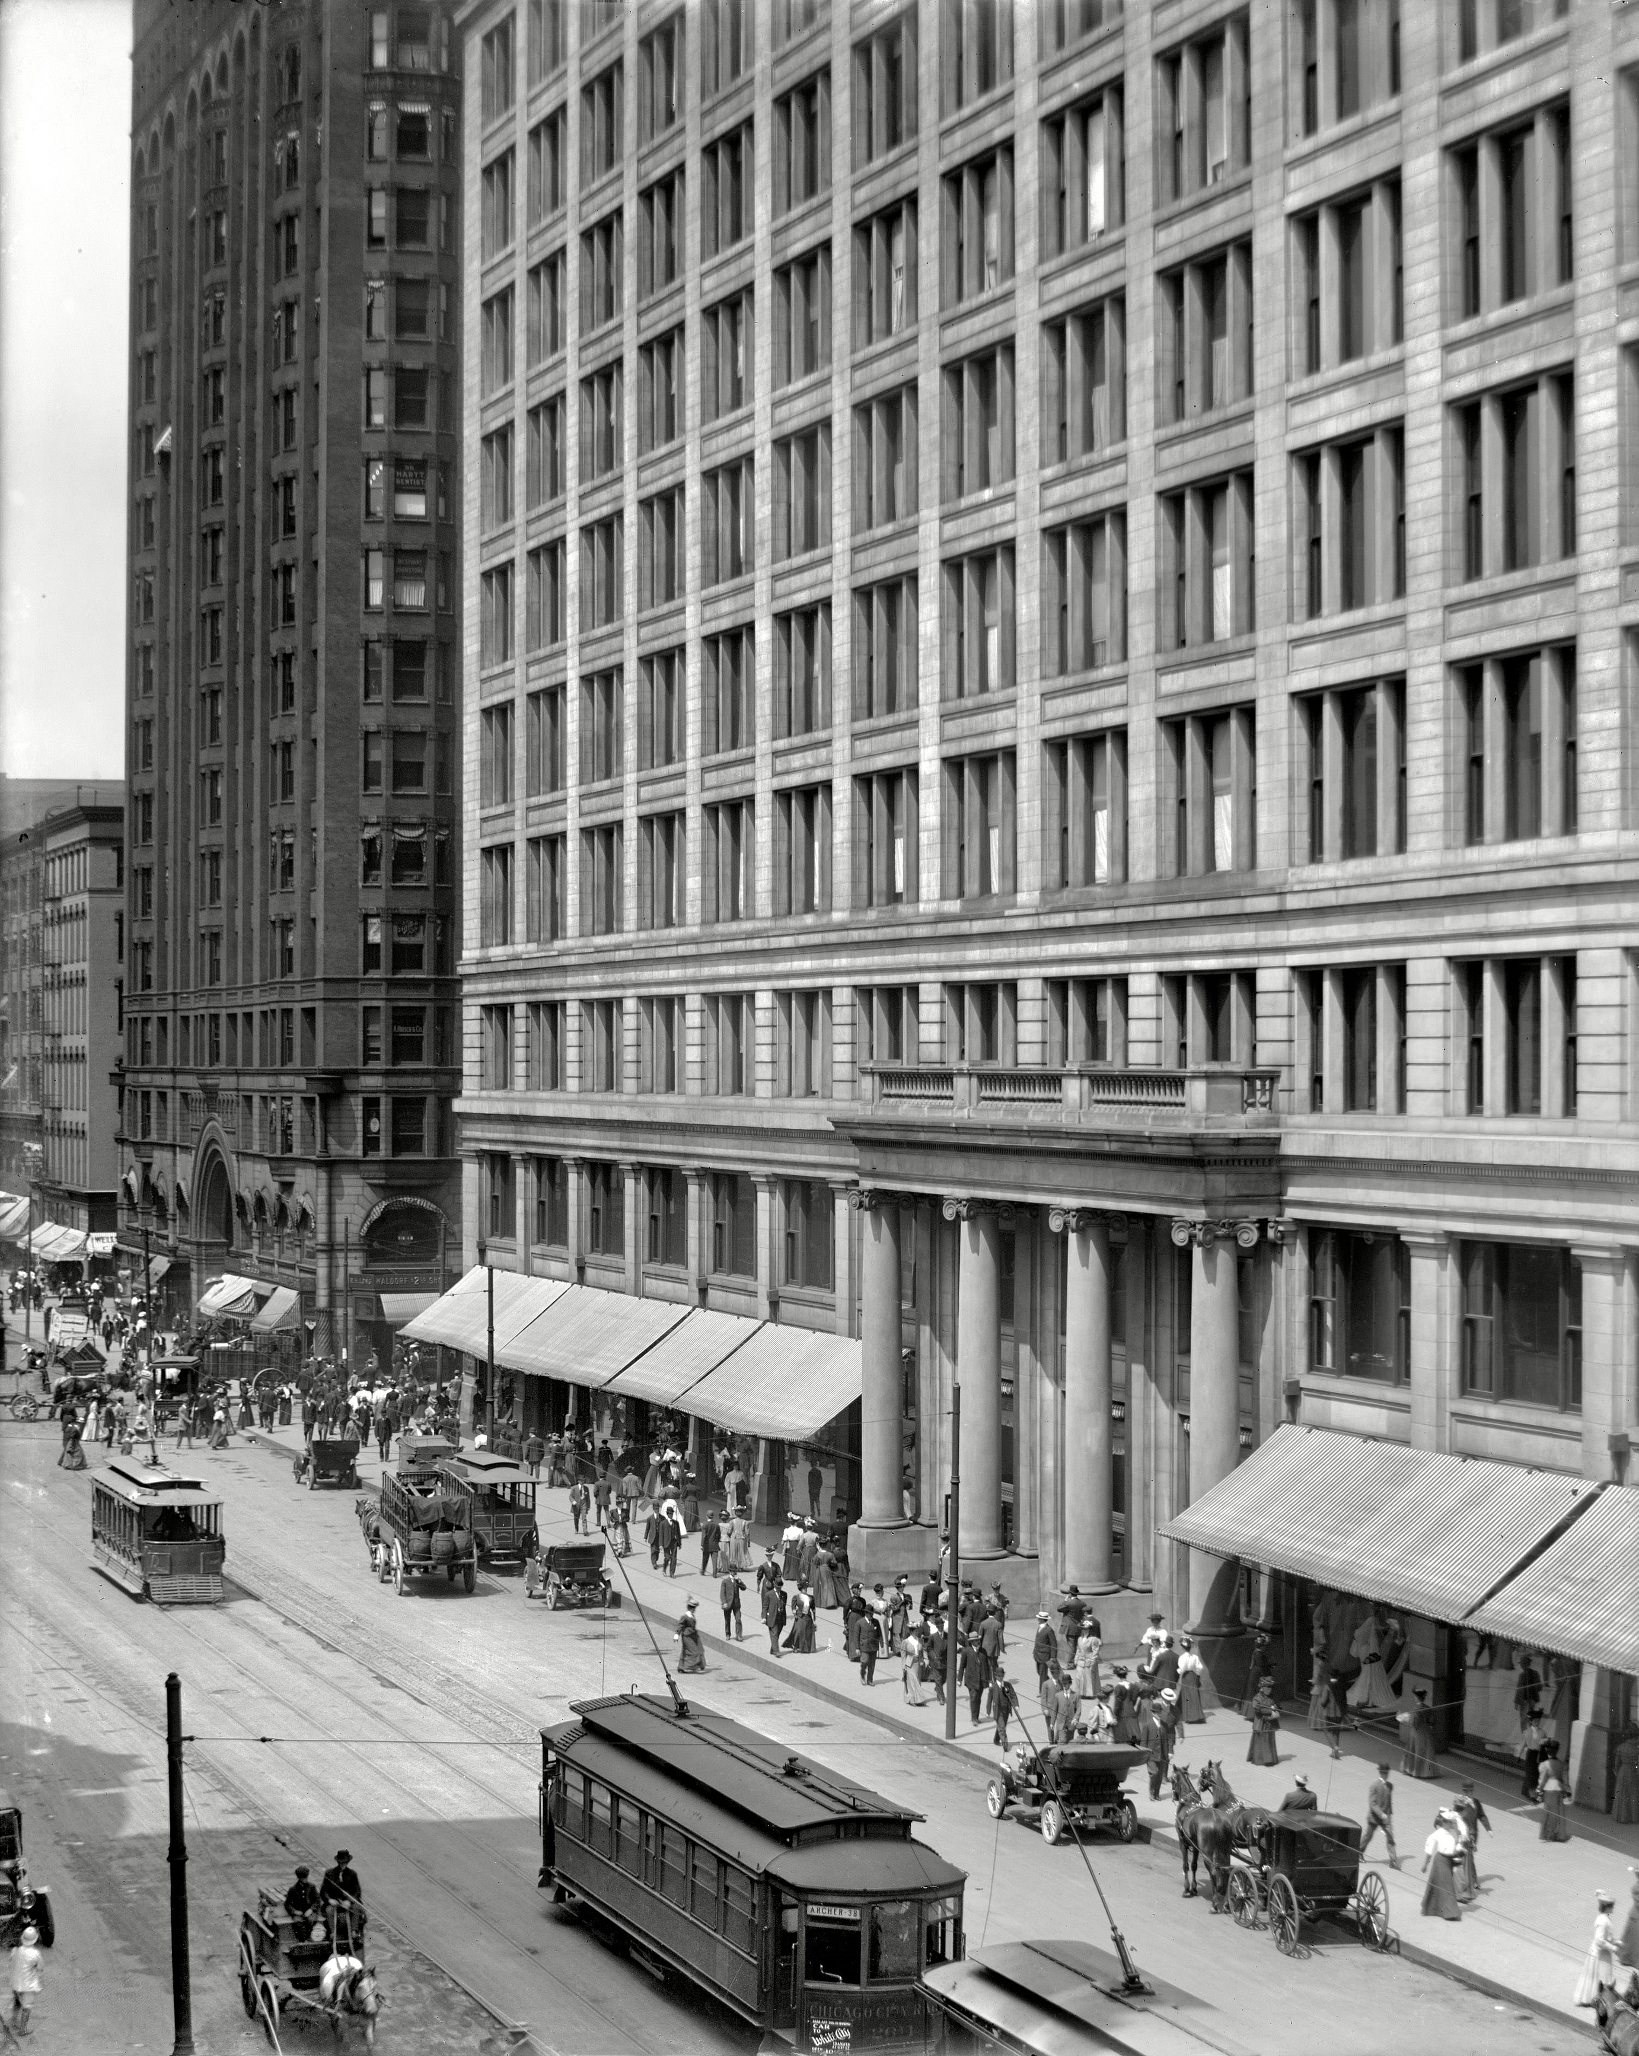 Marshall Field & Co. department store, State Street, Chicago circa 1908